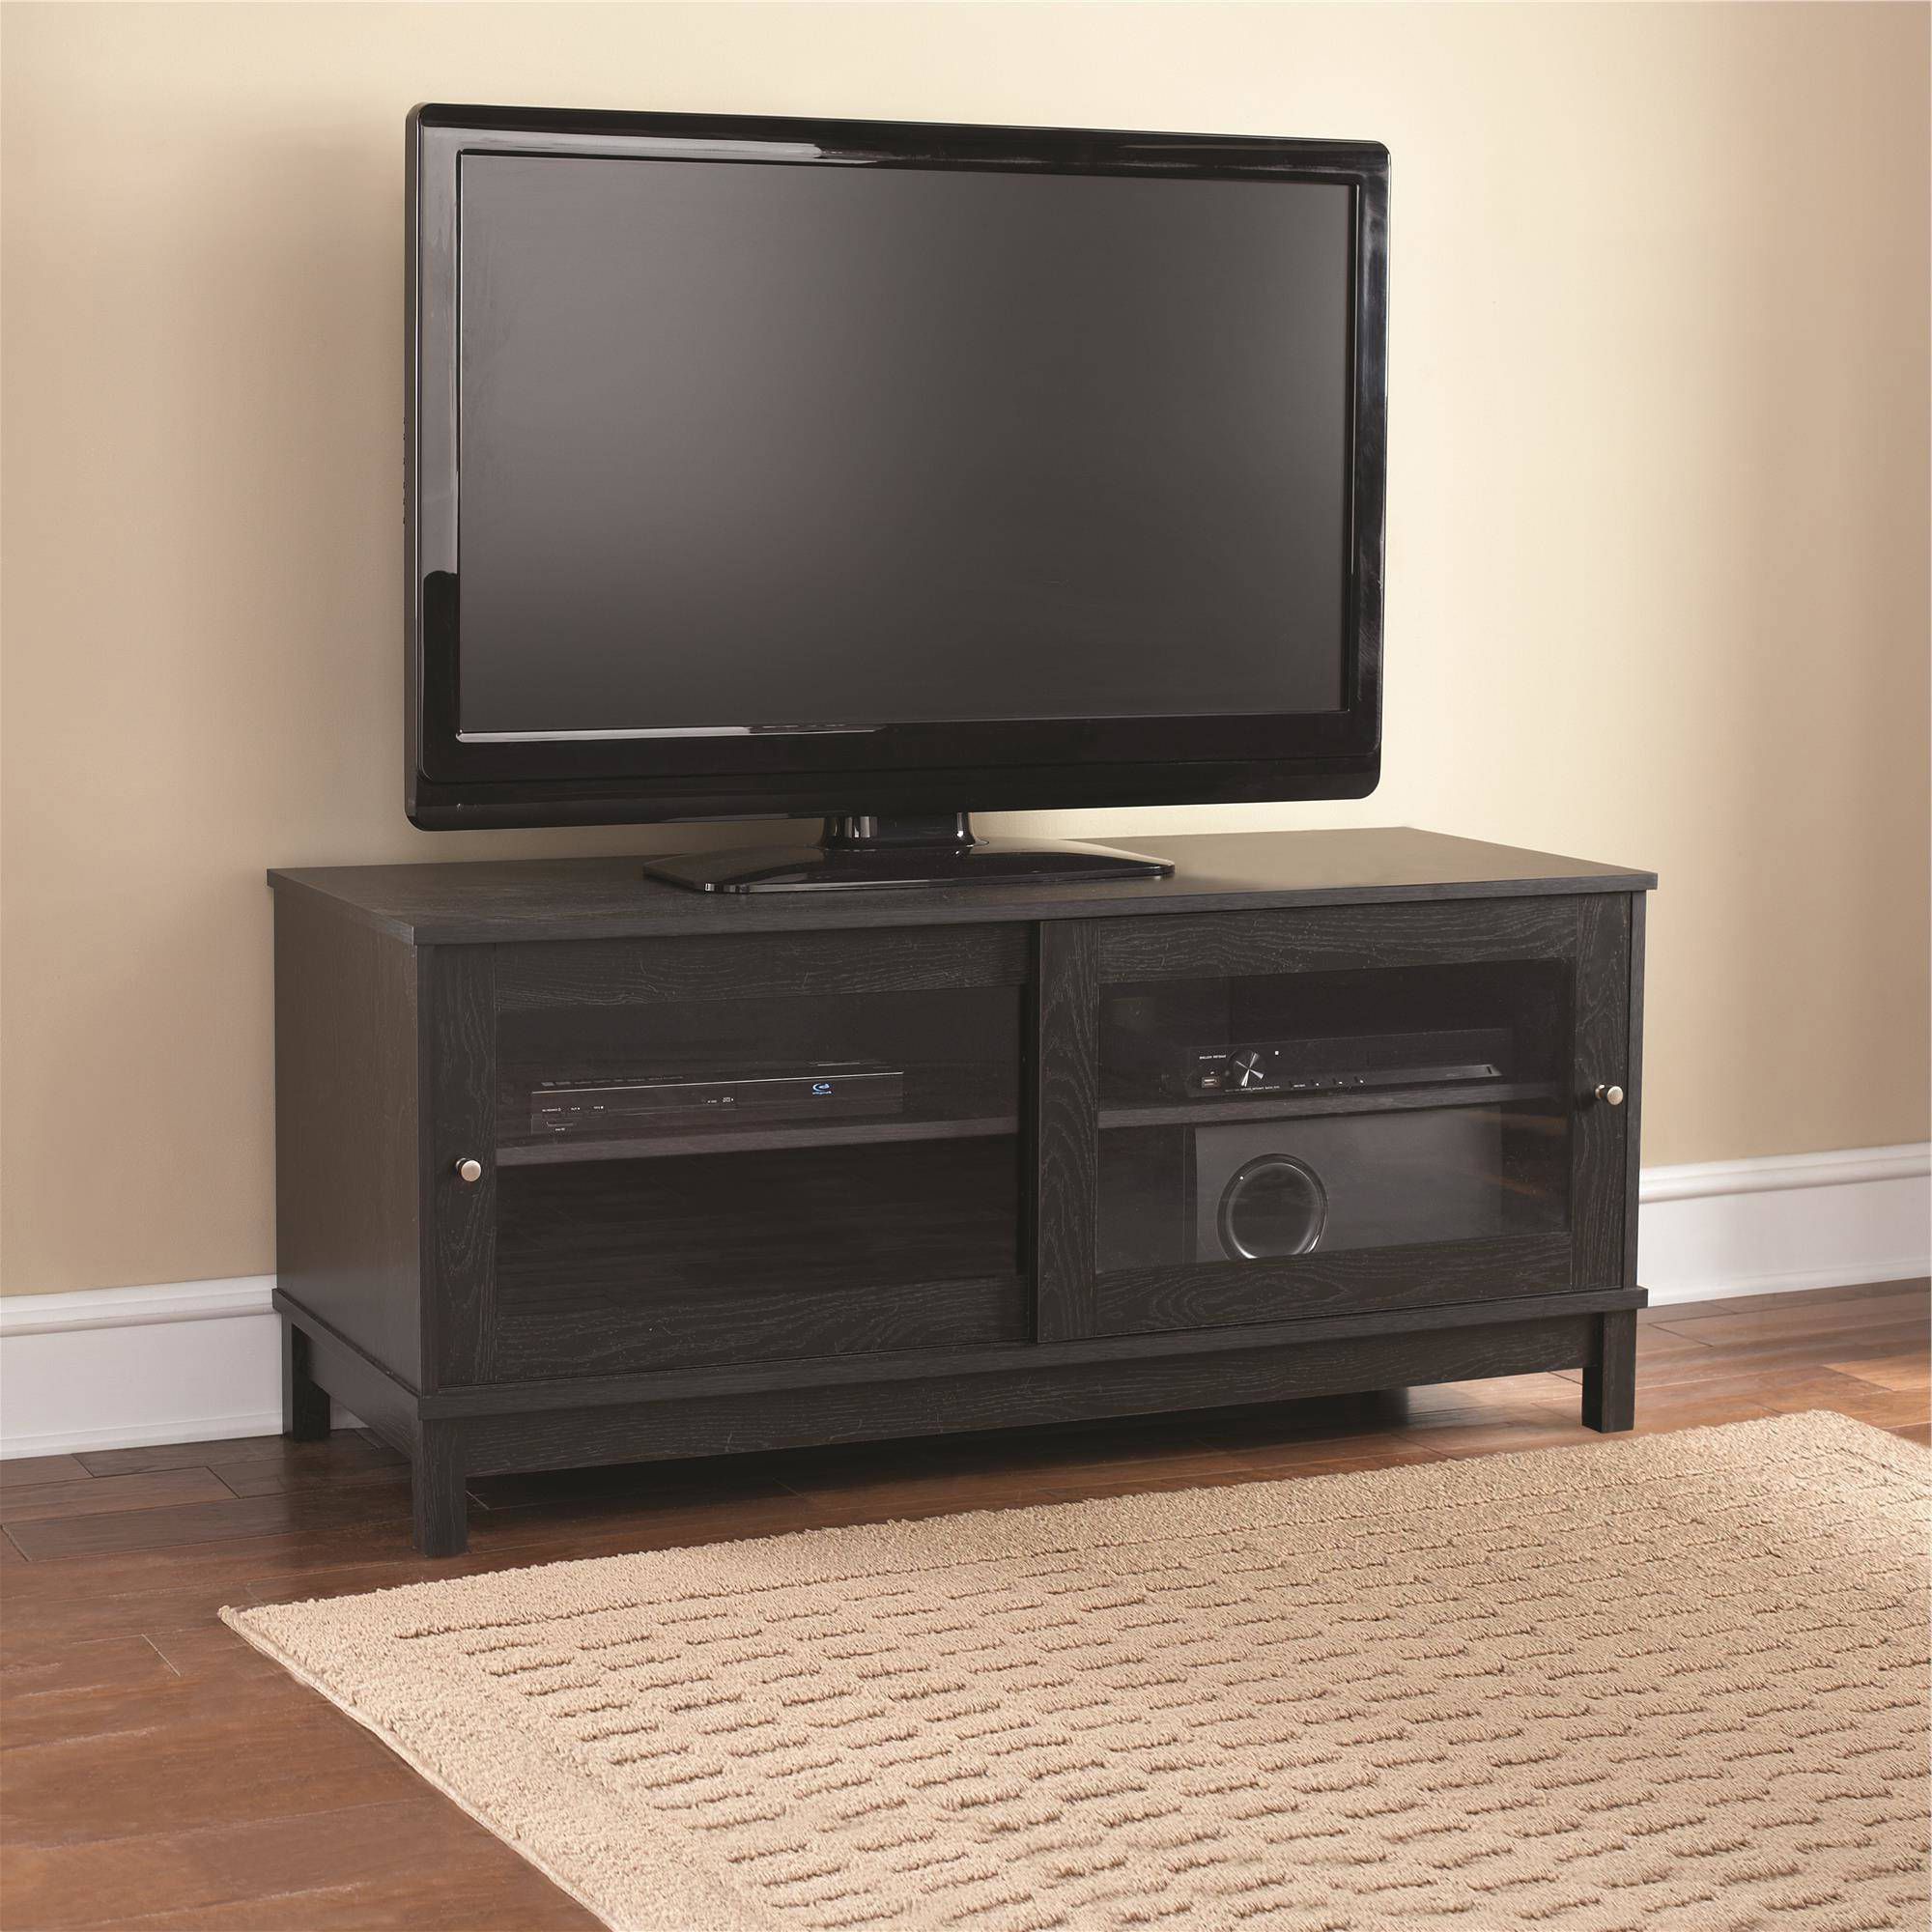 Best And Newest Mainstays 55" Tv Stand With Sliding Glass Doors, Multiple Colors For Tv Stands For 55 Inch Tv (View 1 of 20)